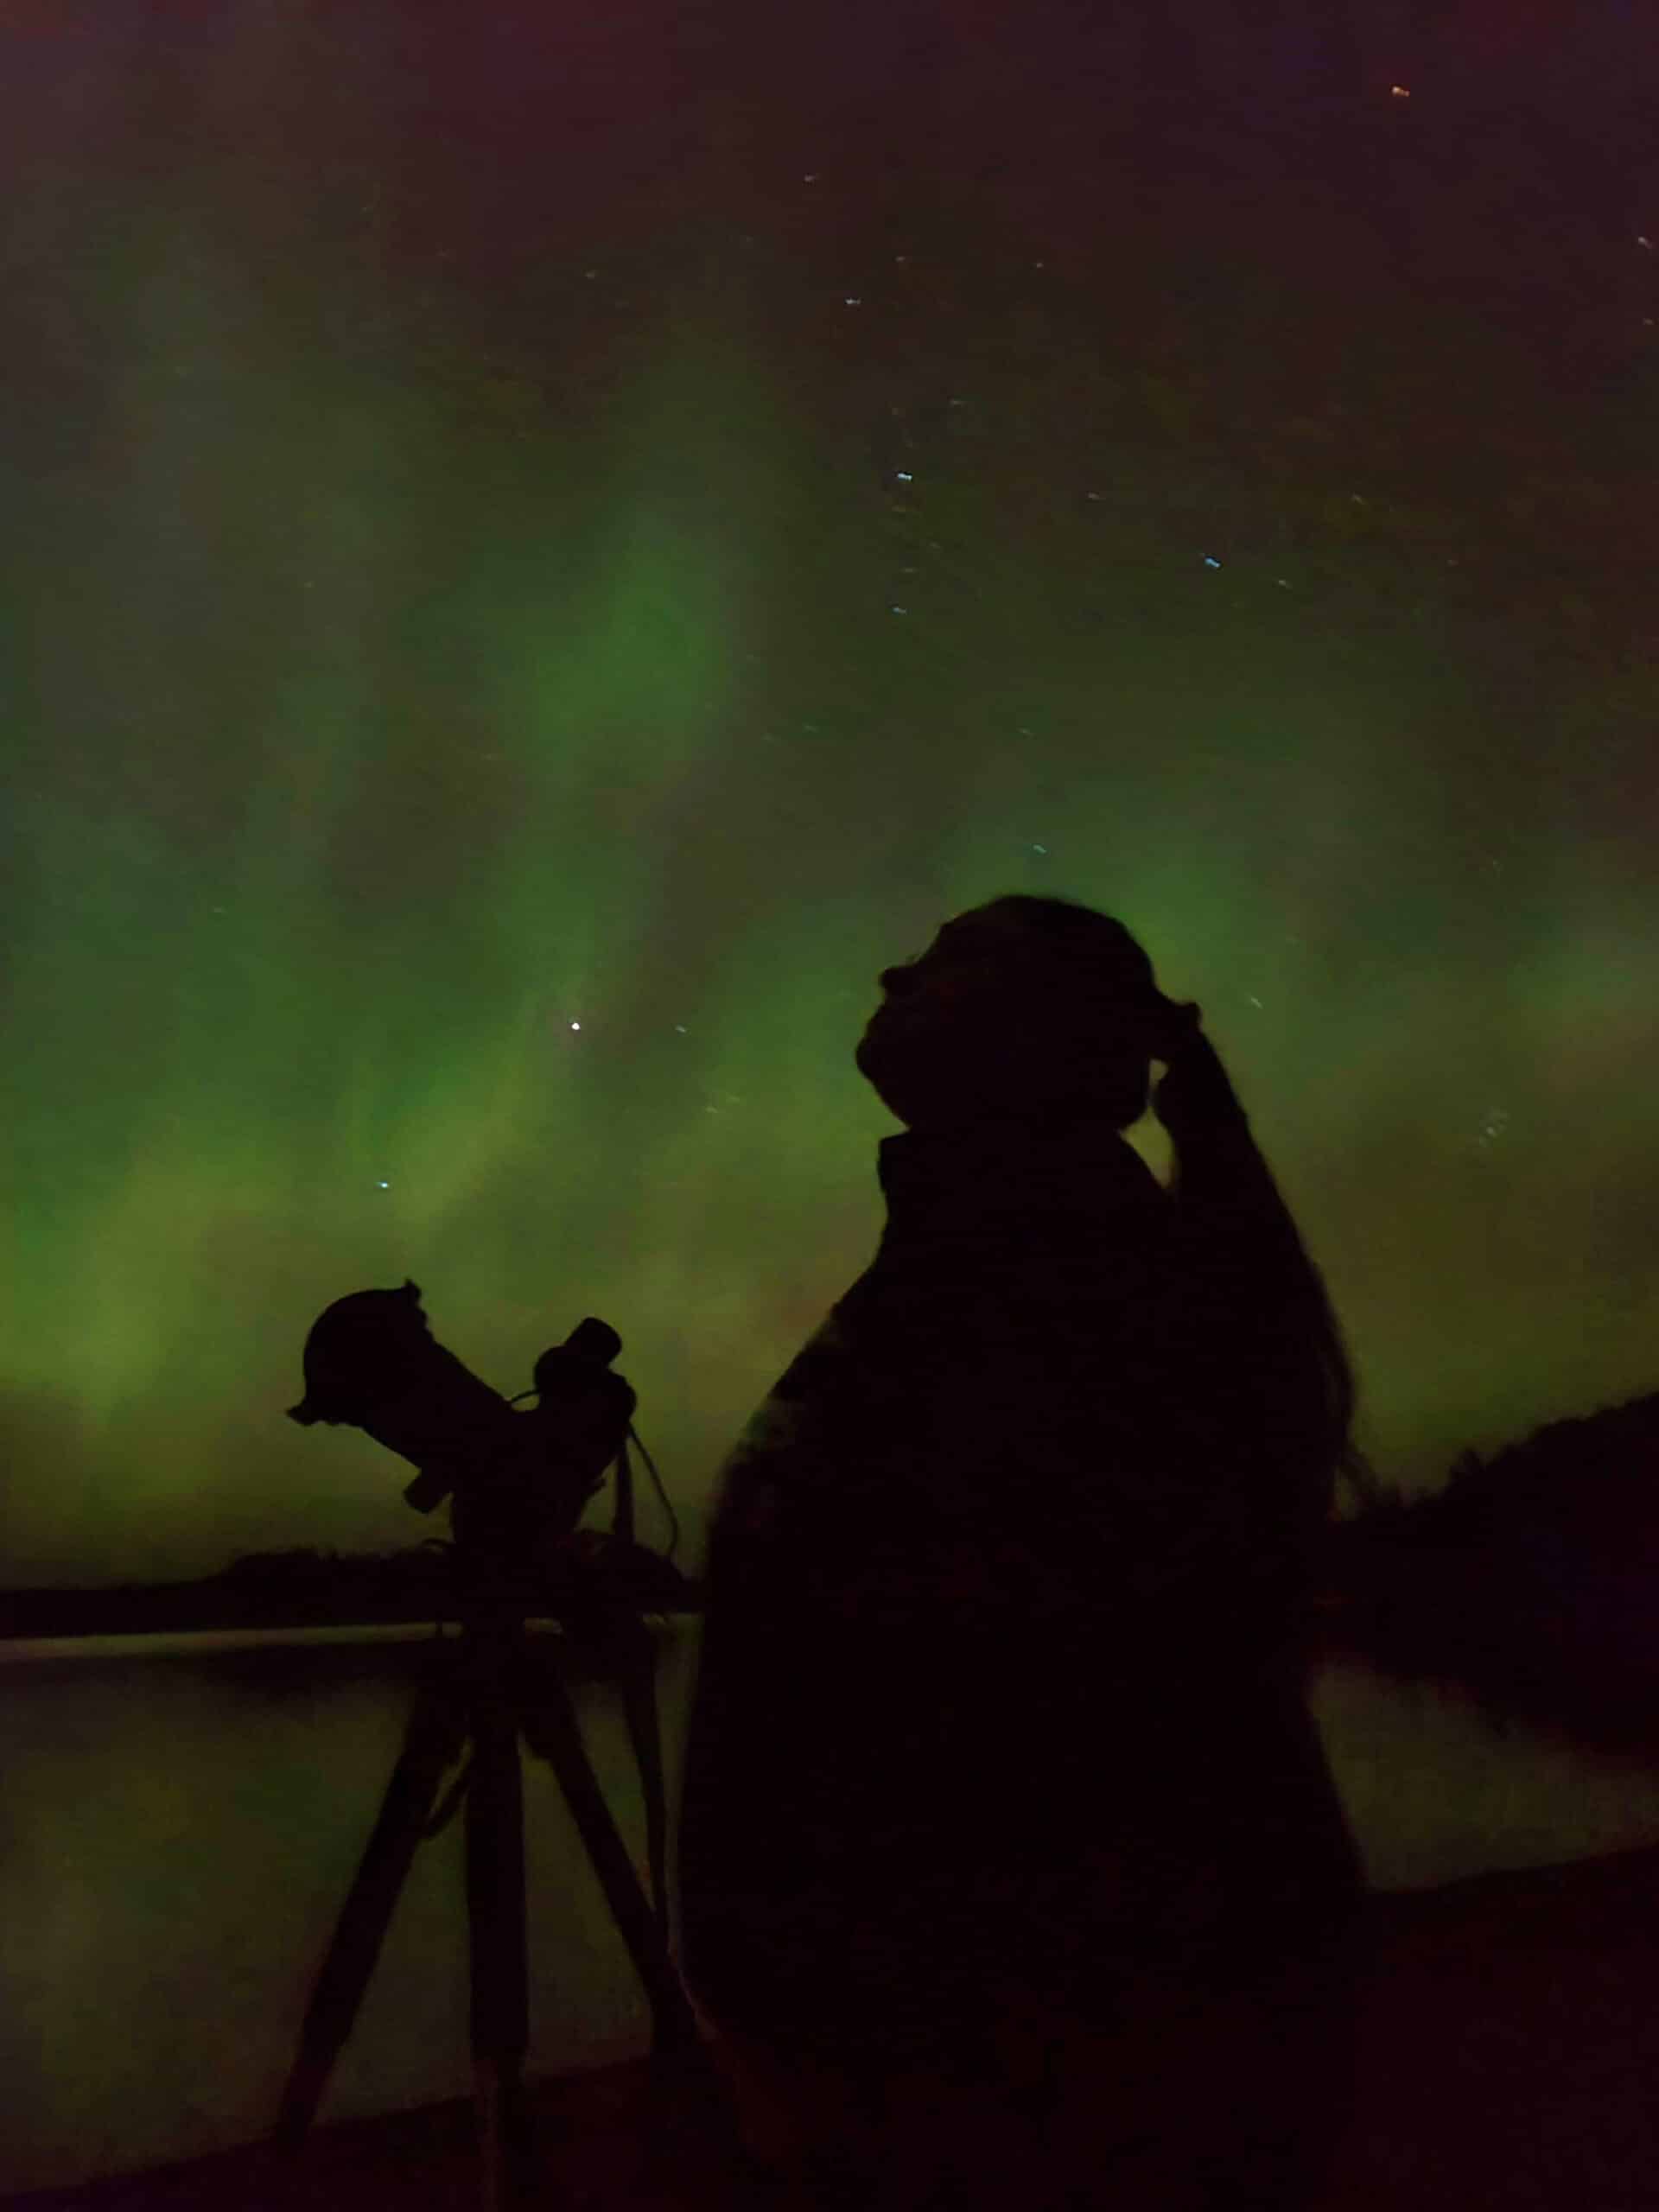 The silhouette of a woman with green northern lights behind her.